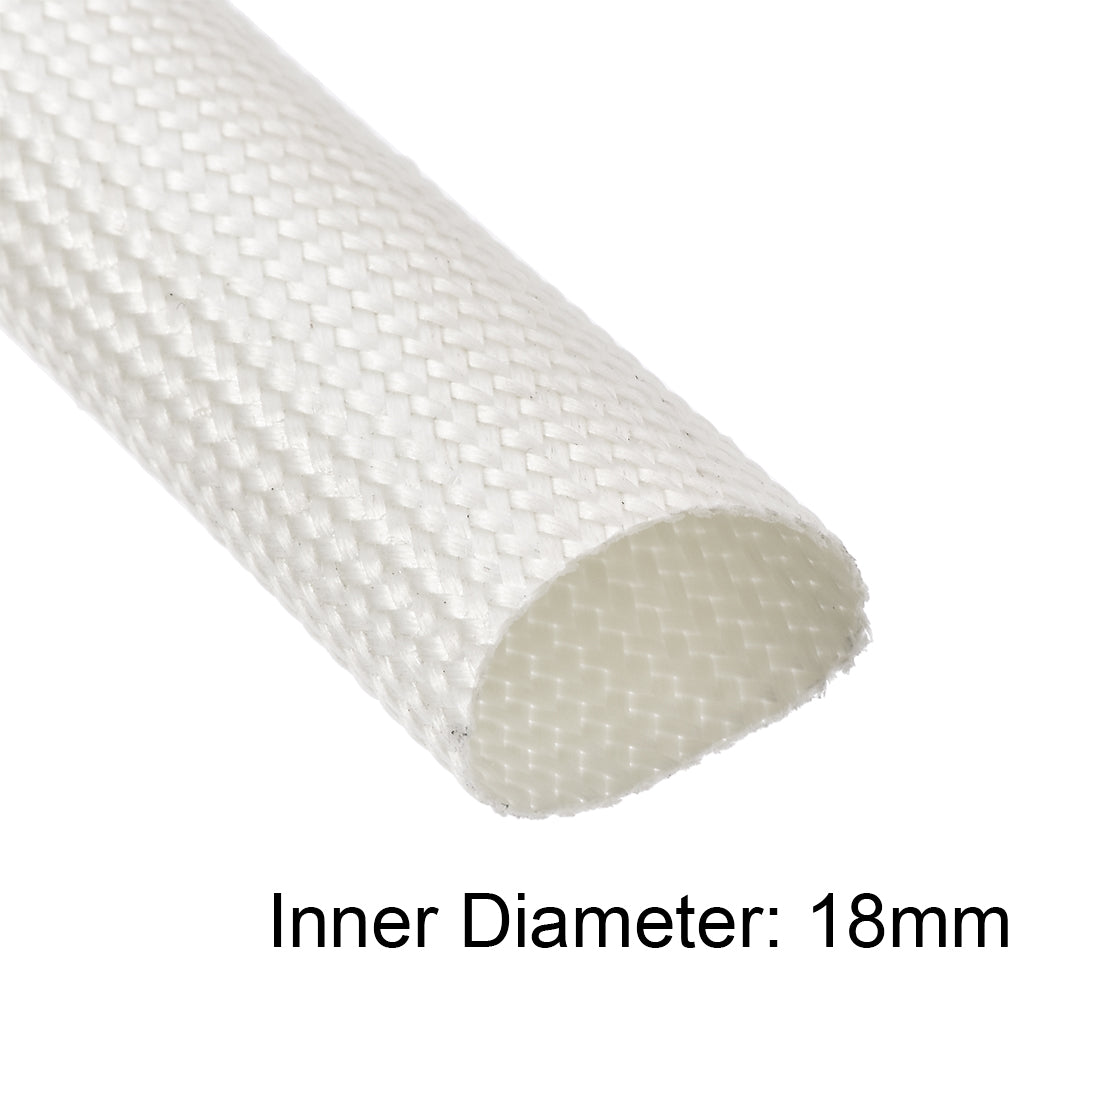 uxcell Uxcell Insulation Cable Protector, 9.8Ft-18mm High TEMP Fiberglass Sleeve White